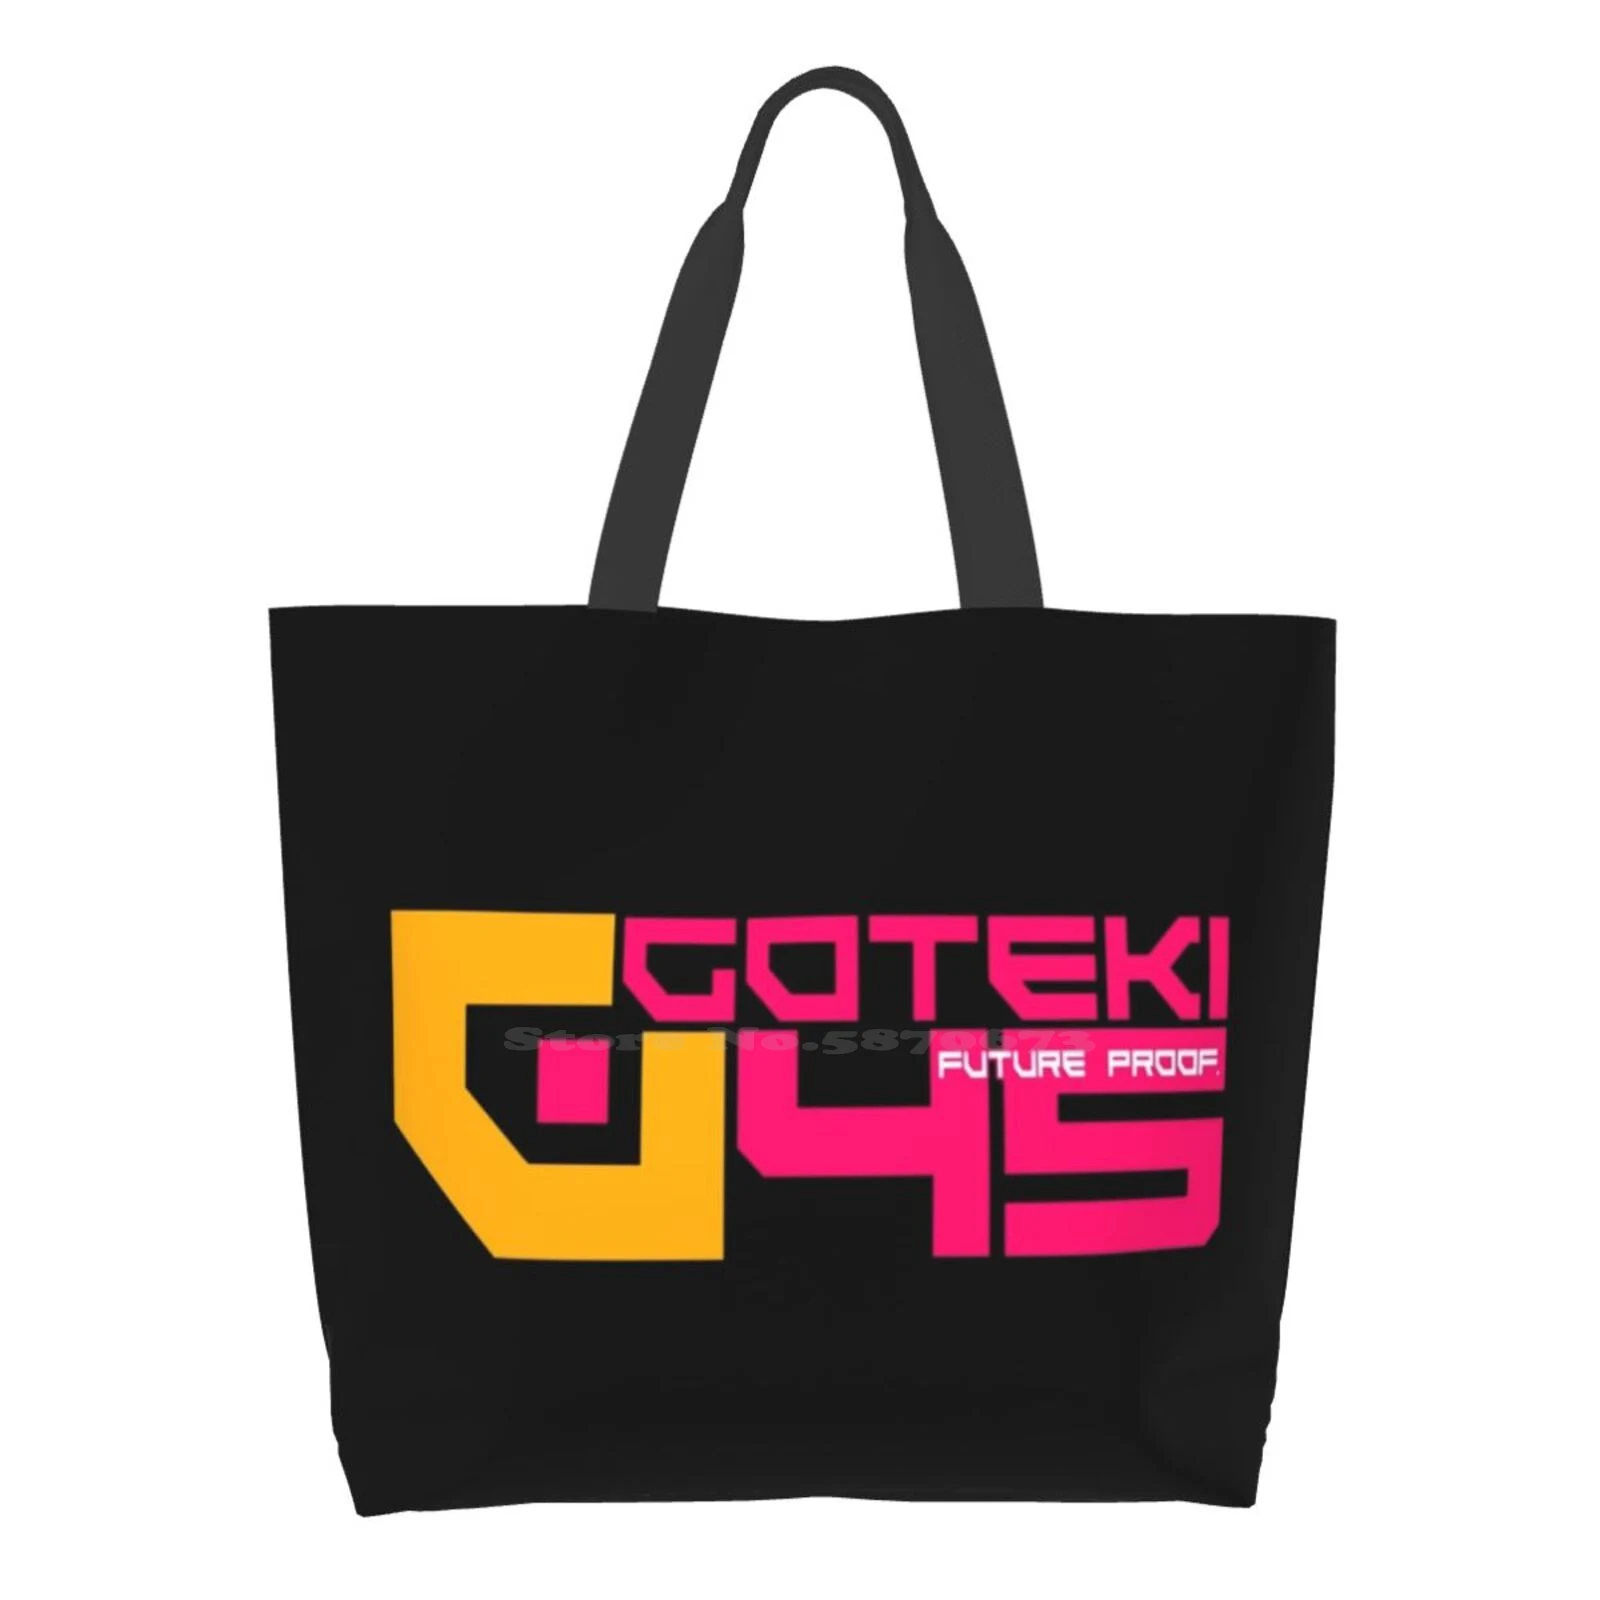 

Goteki 45 Hd Variant 1 High Quality Large Size Tote Bag Goteki 45 Wipeout Pure Pulse Racing Ps2 Ps3 Psx